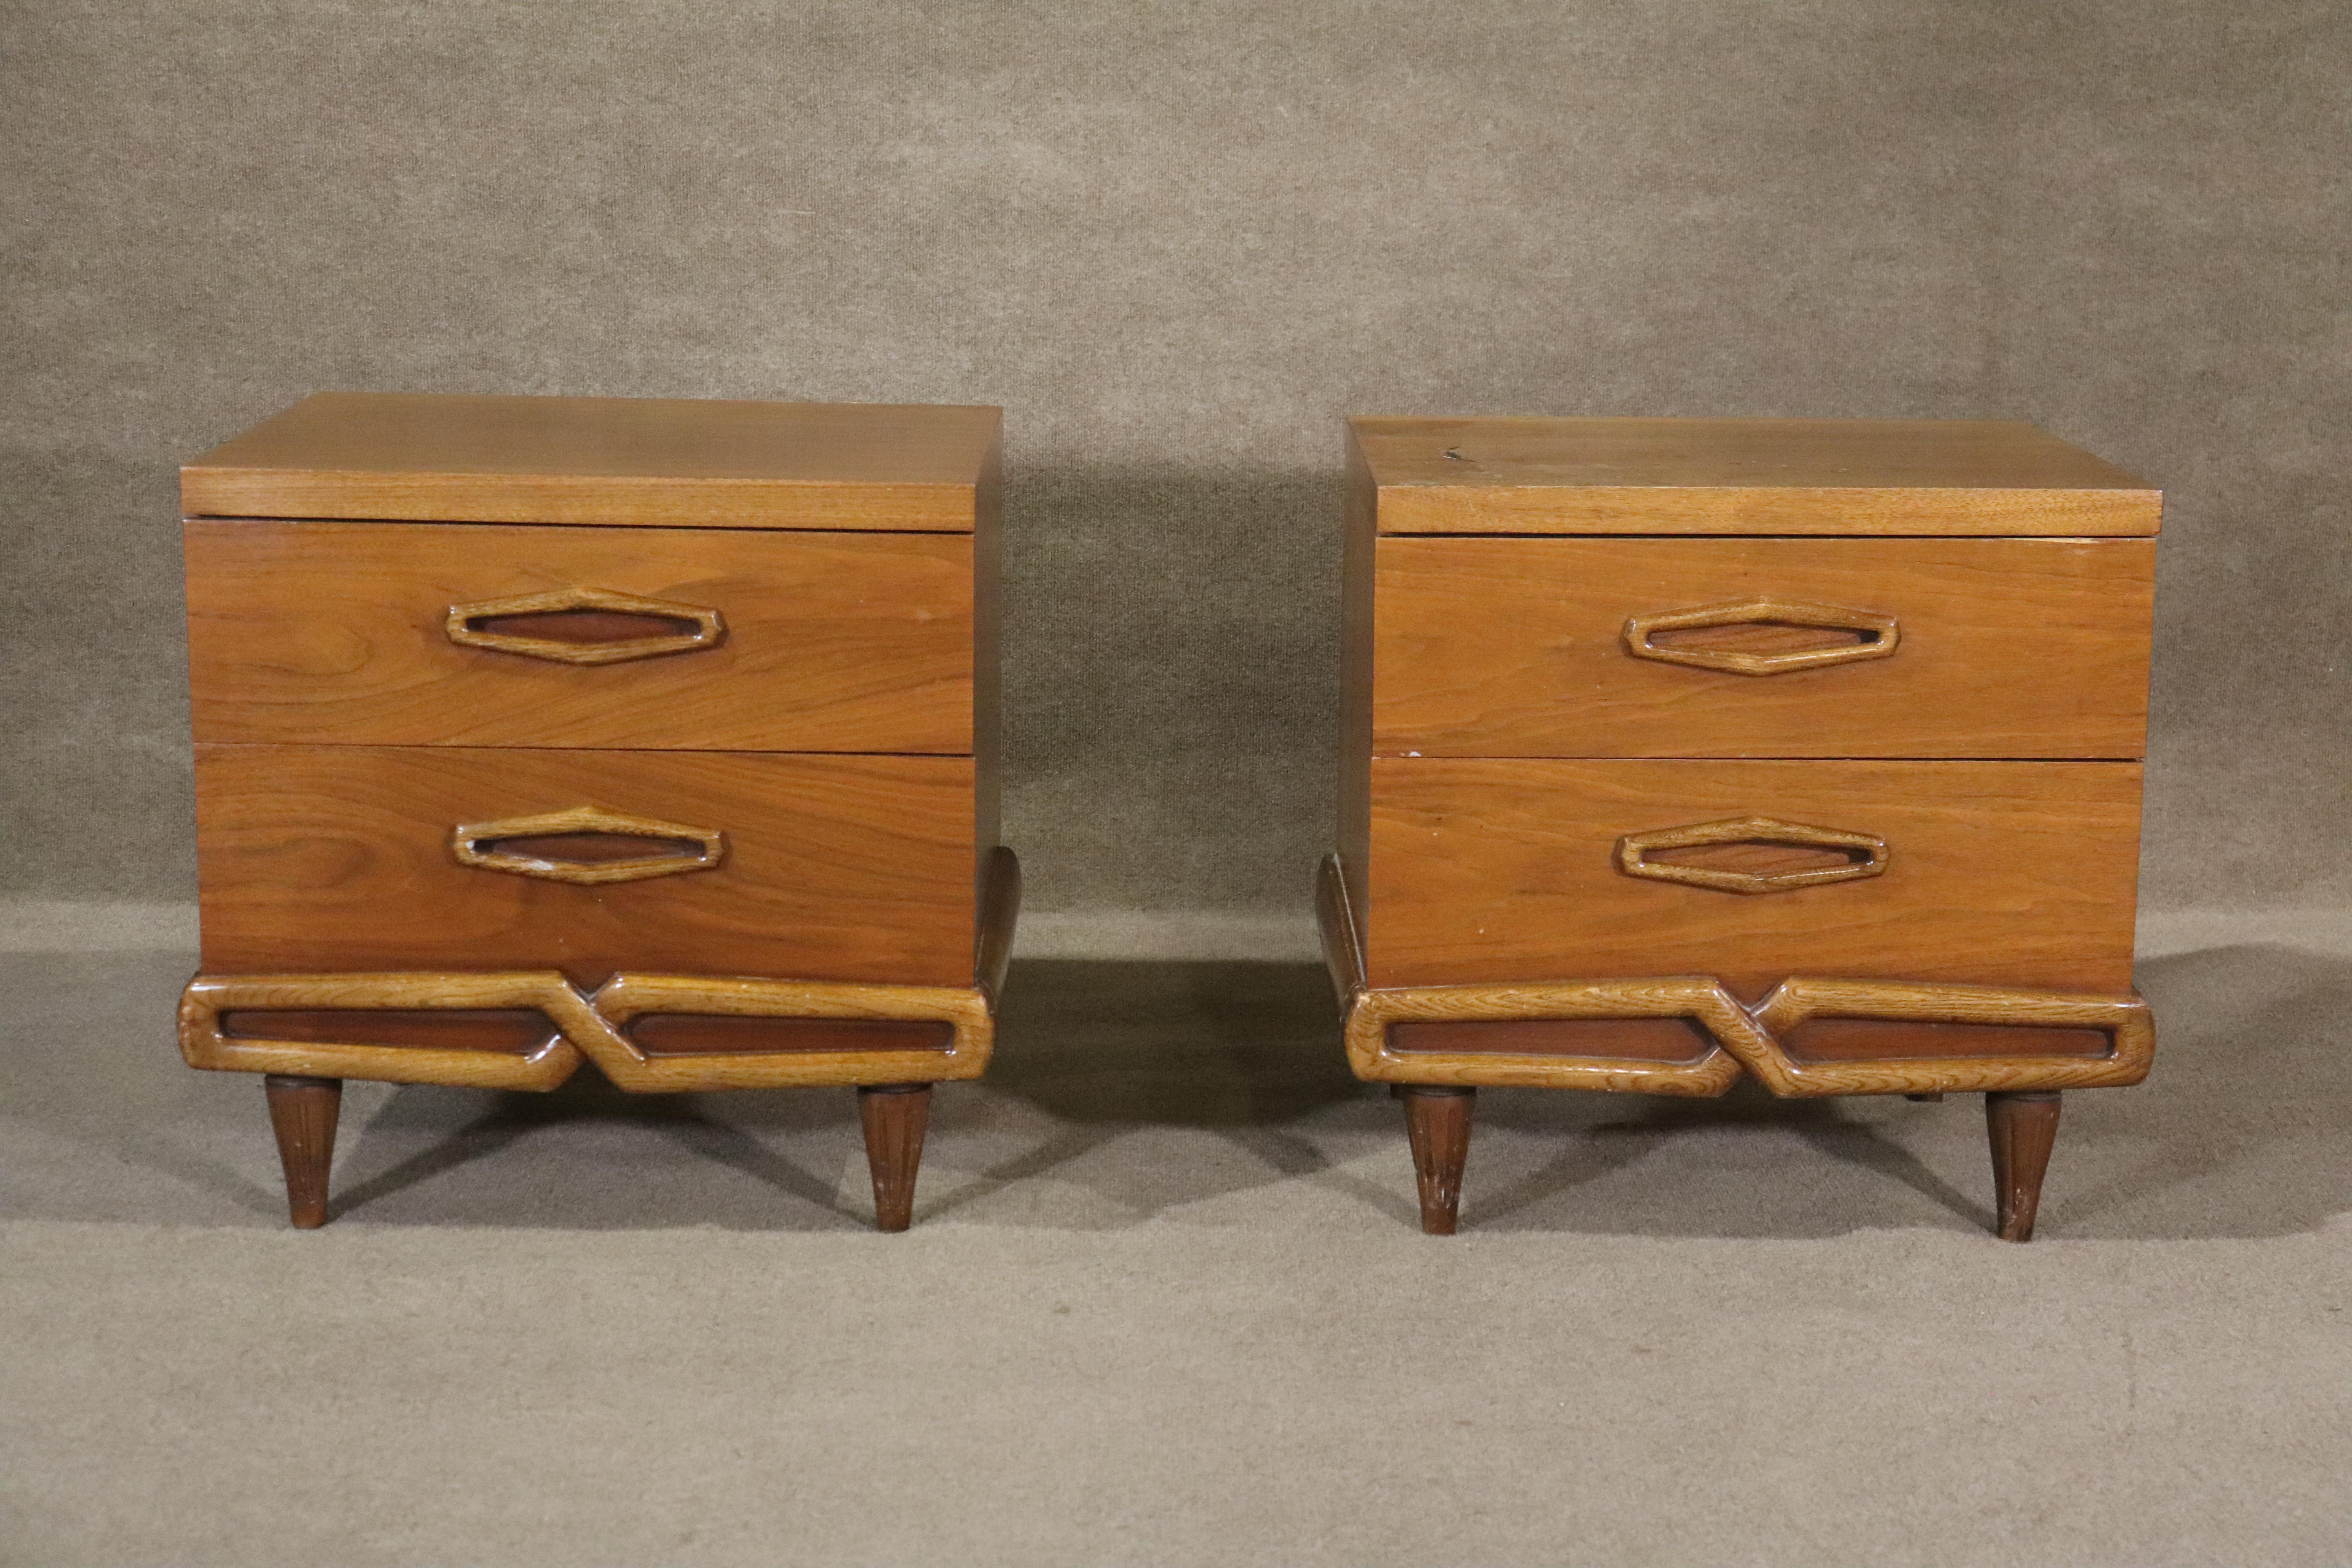 Pair of vintage modern walnut tables with storage. Designed with two drawers and a sculpted wood bow.
Please confirm location NY or NJ